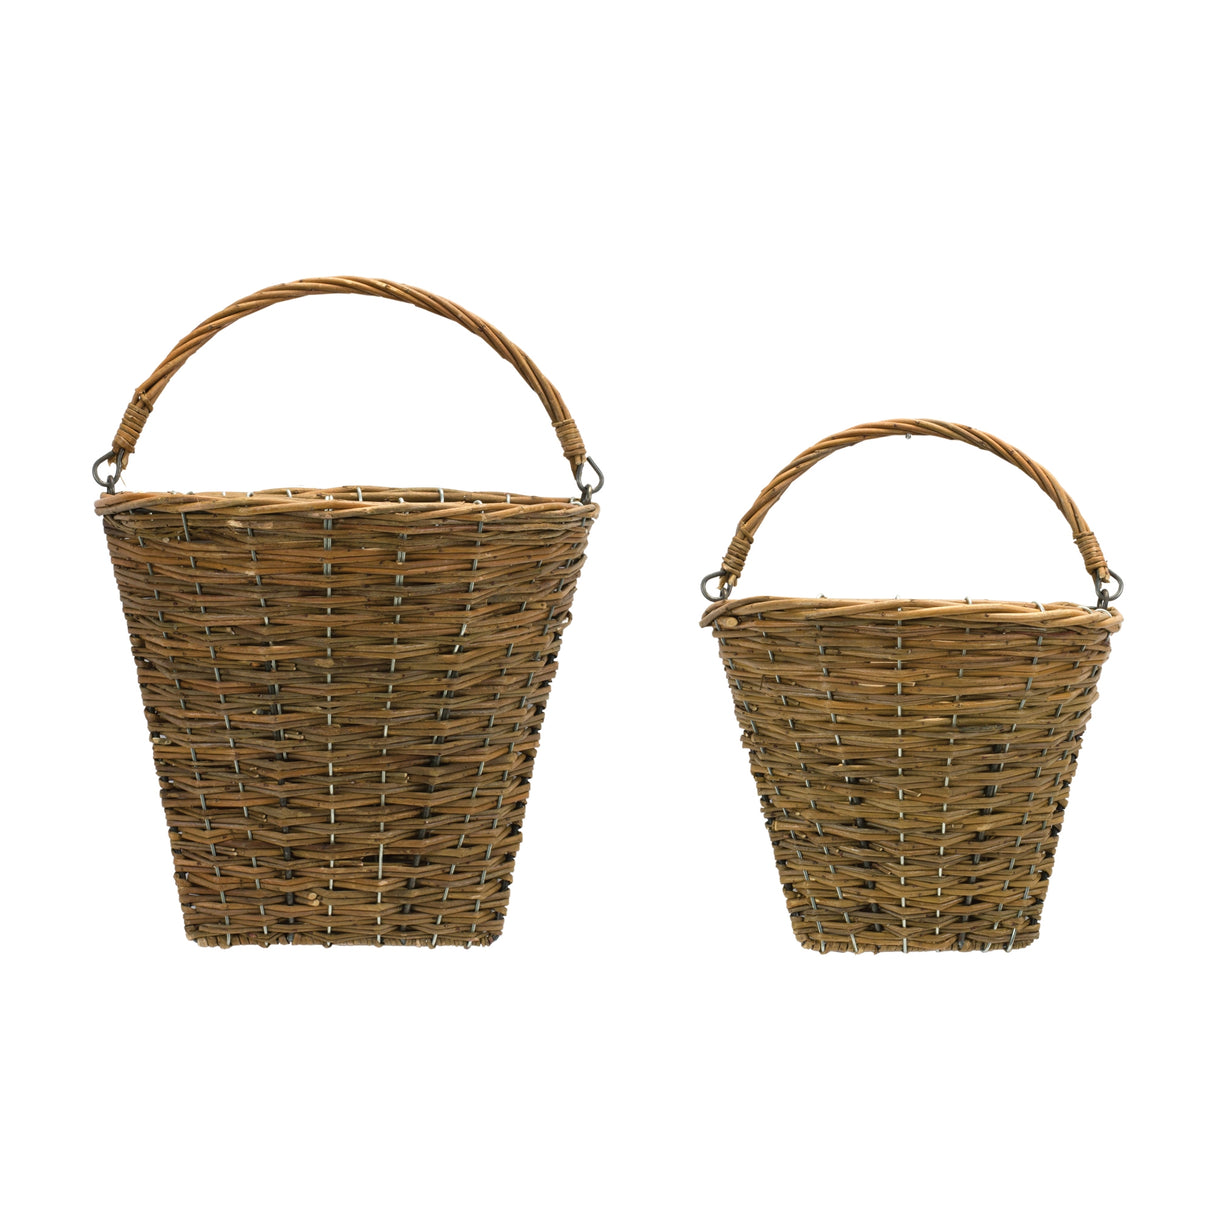 Willow Wall Basket - 2 Sizes